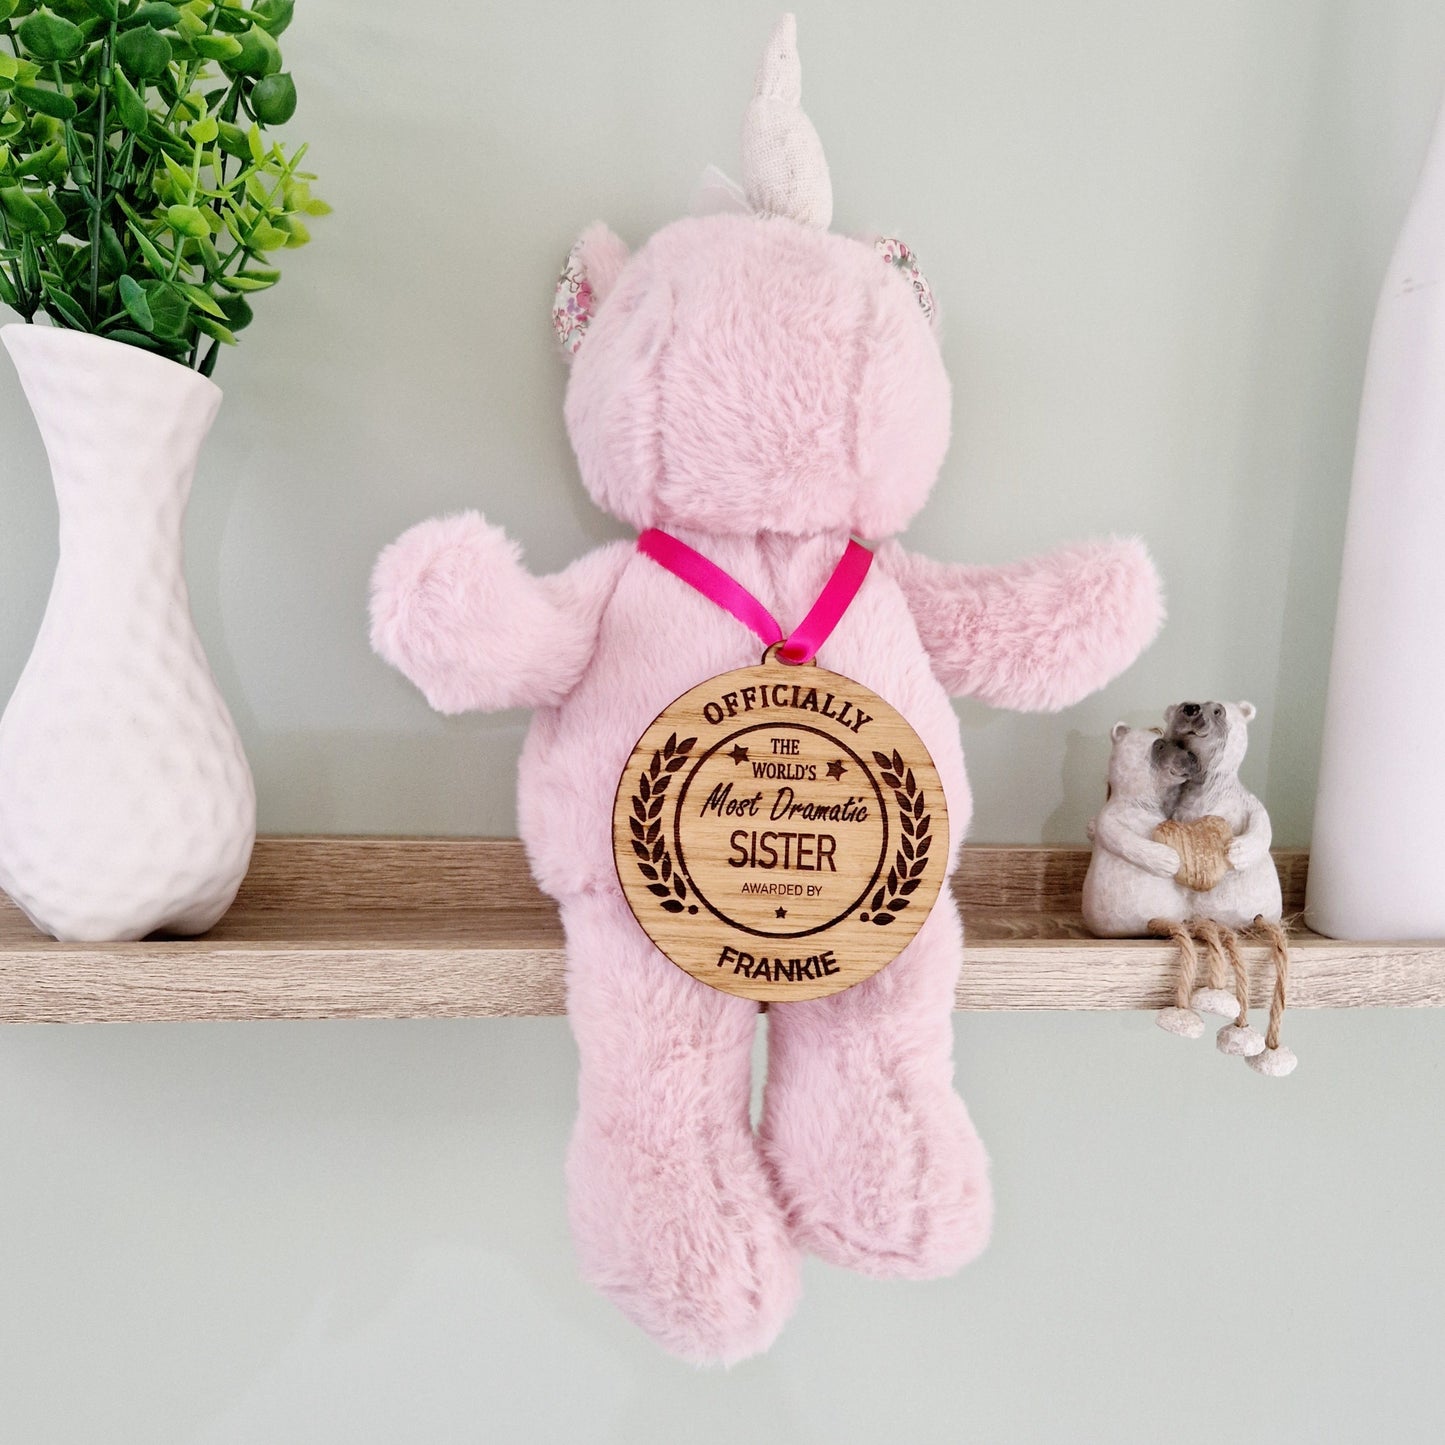 'World's Most Dramatic Sister' Wooden Medal